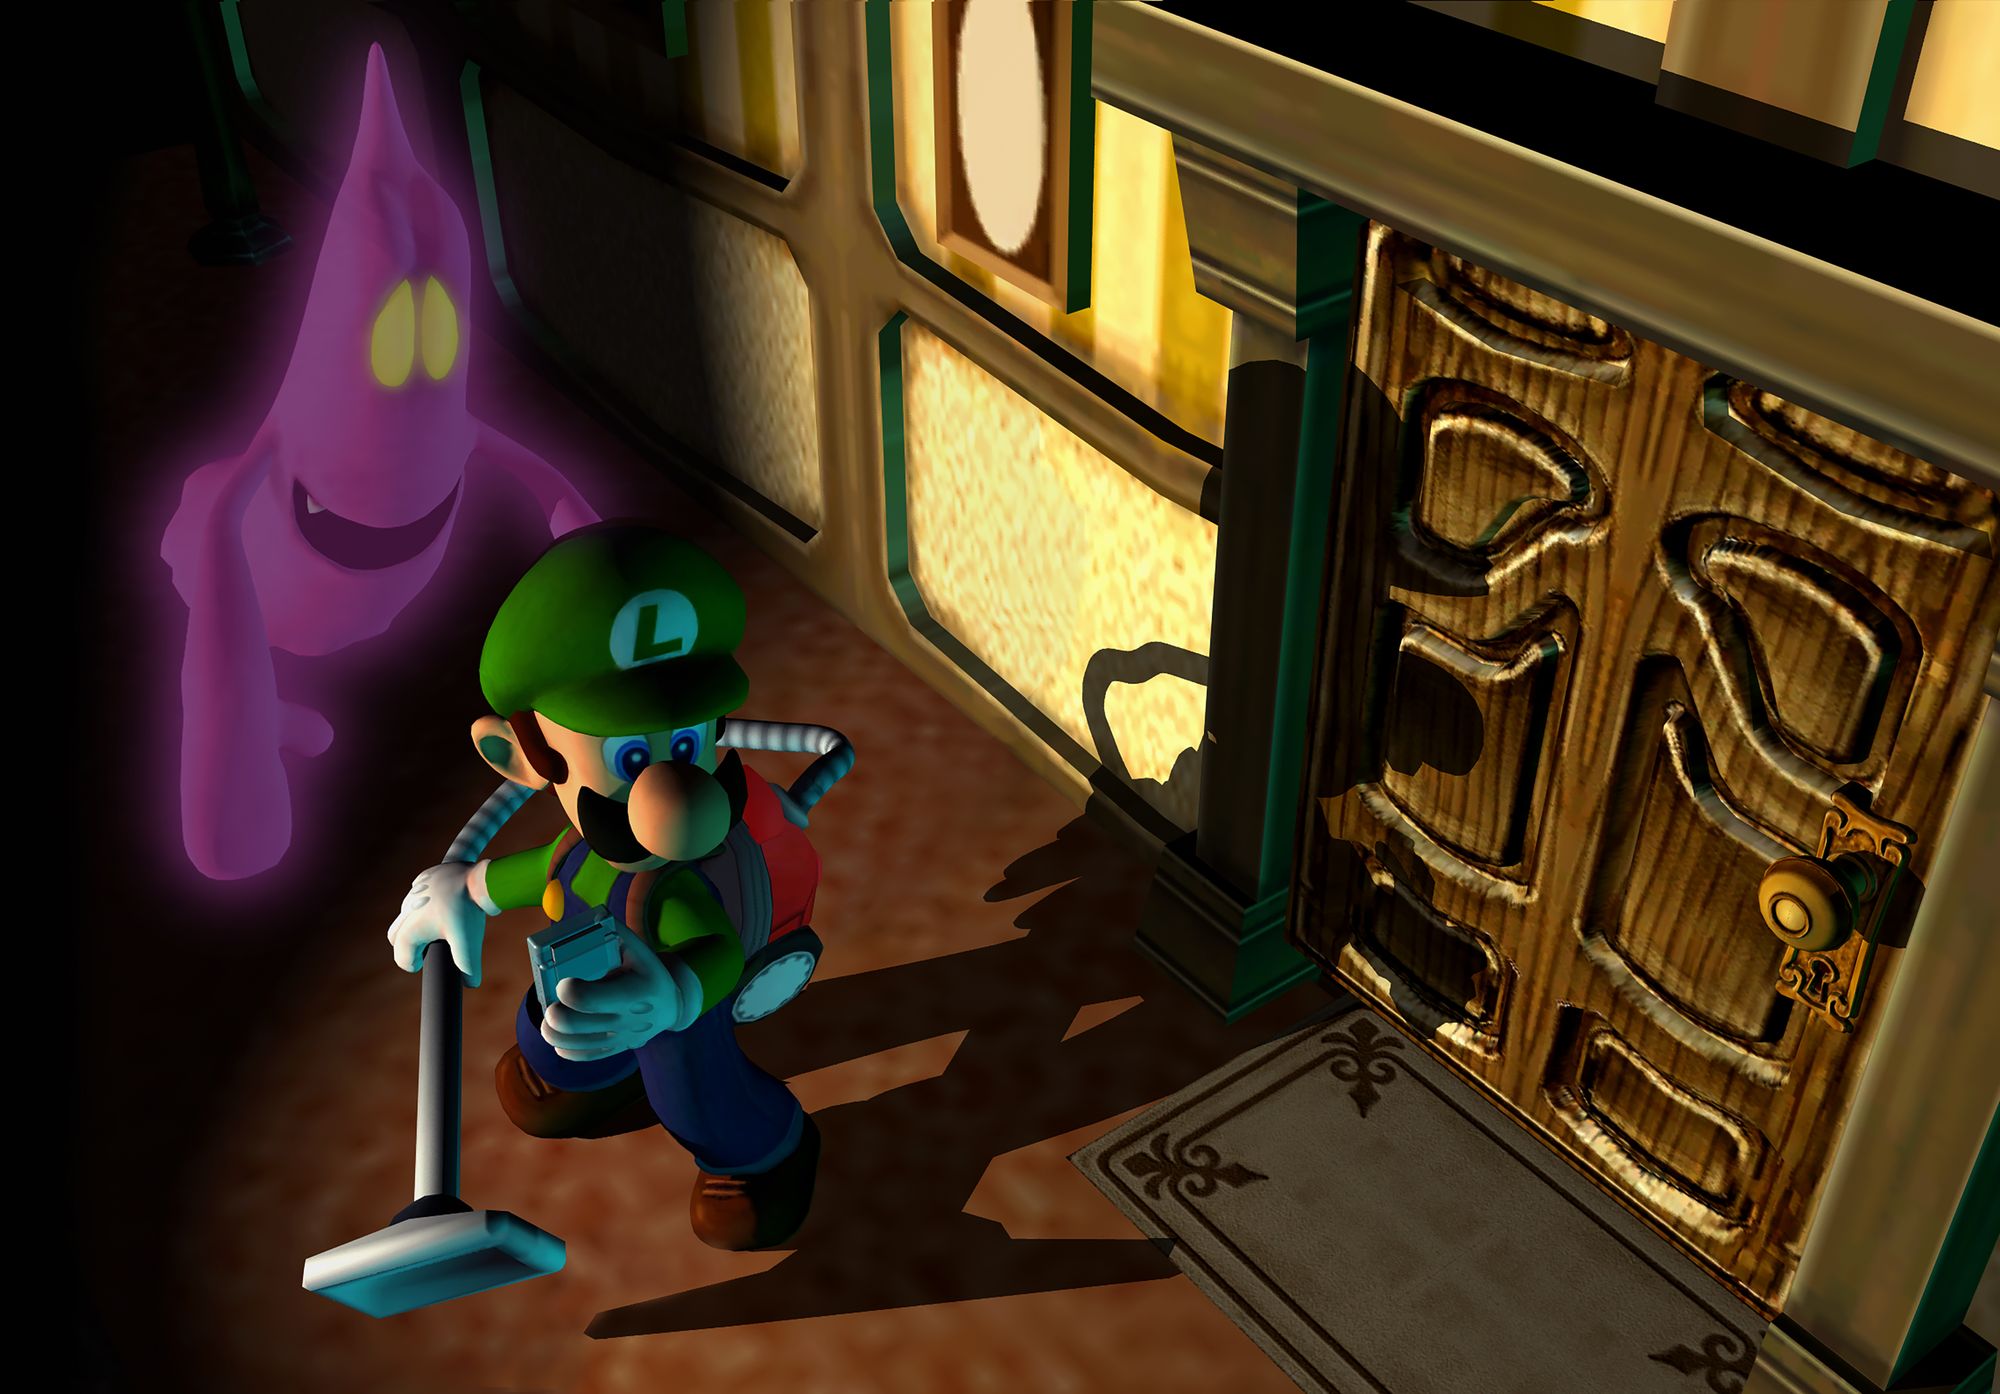 Are they ever gonna make a Luigi's Mansion 4 or what? What am I